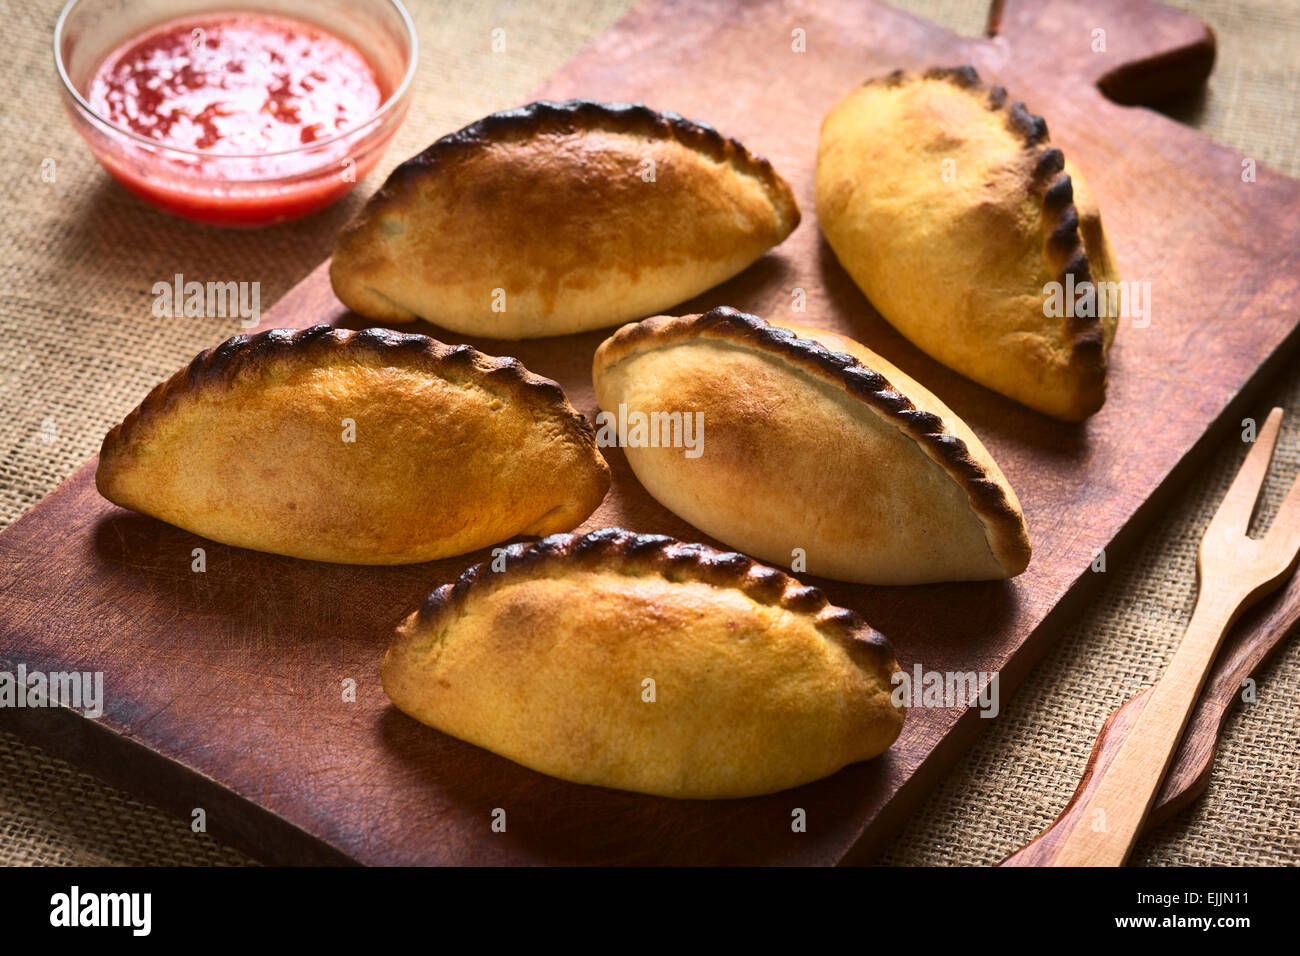 Traditional Bolivian savory pastries called Saltena filled with thick meat stew, which is a popular street snack in Bolivia Stock Photo